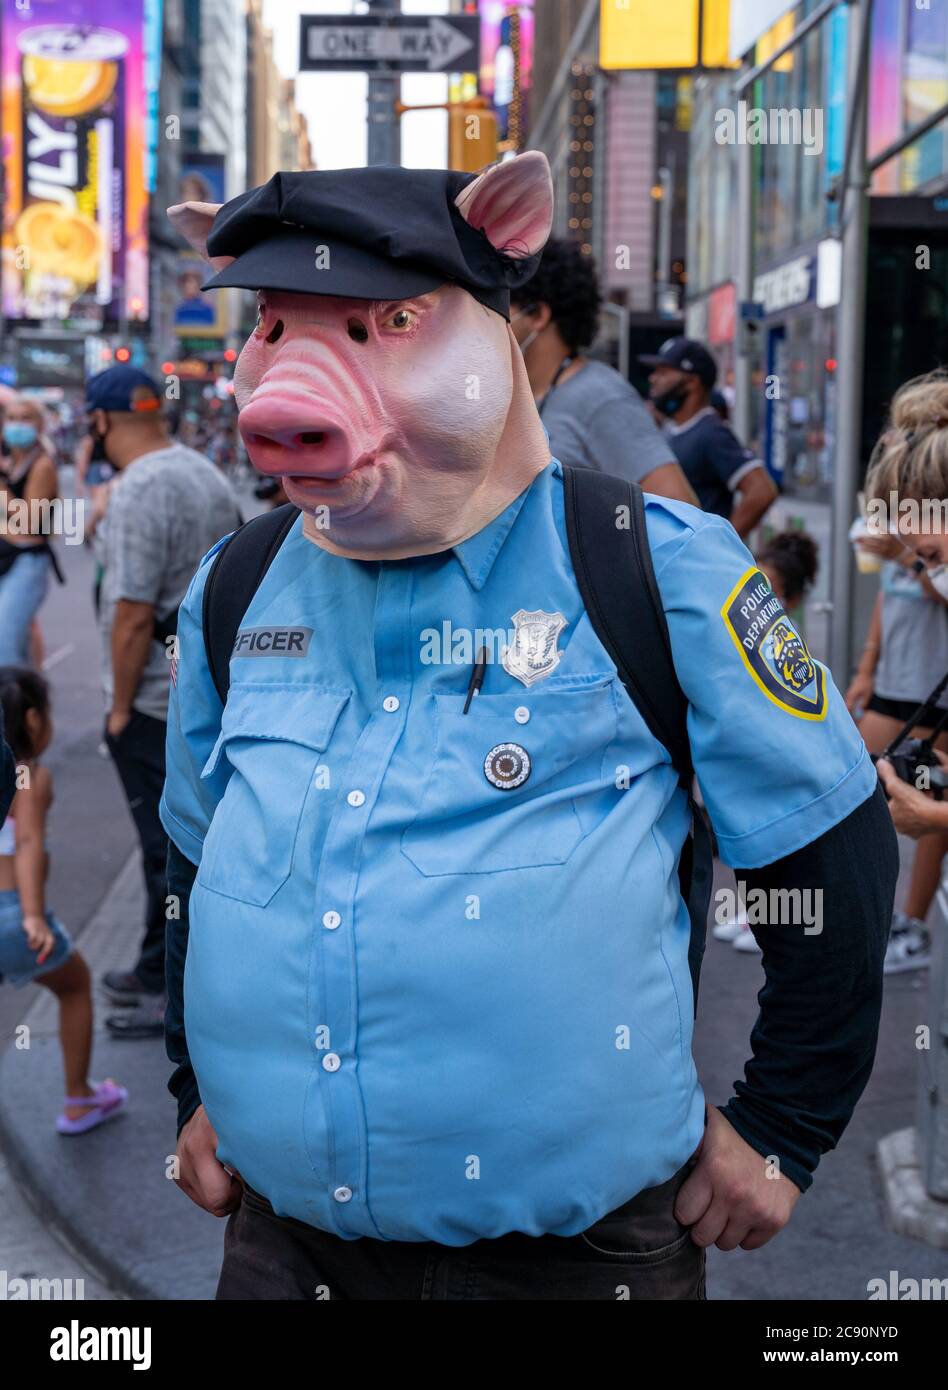 black-womenswomxn-march-black-lives-matter-protest-new-york-city-cops-are-pigs-f-12-pig-face-2C90NYD.jpg